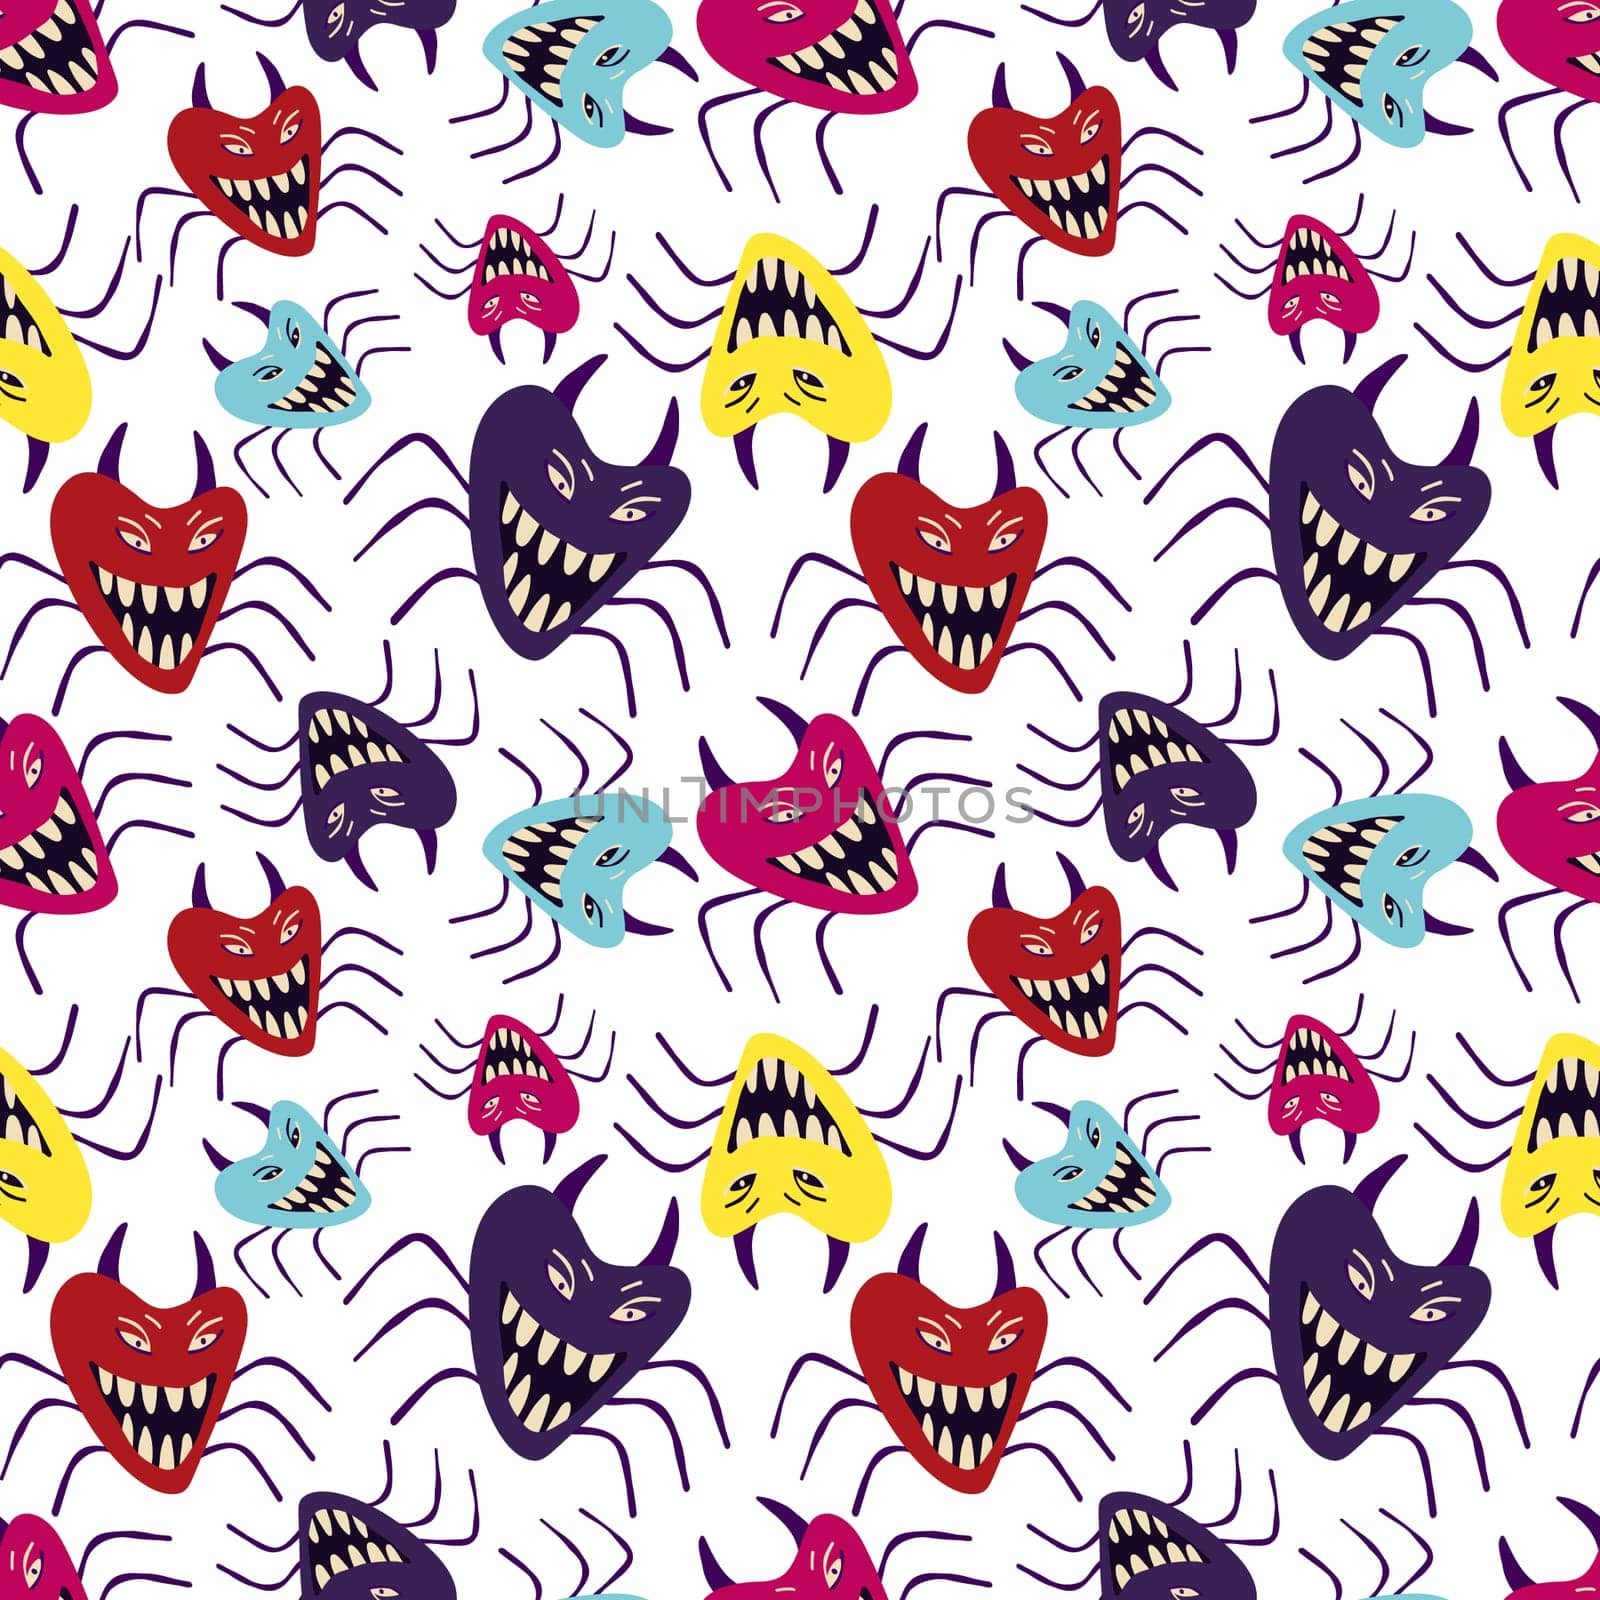 Pink Halloween seamless pattern of creepy insects with big teeth and mouths